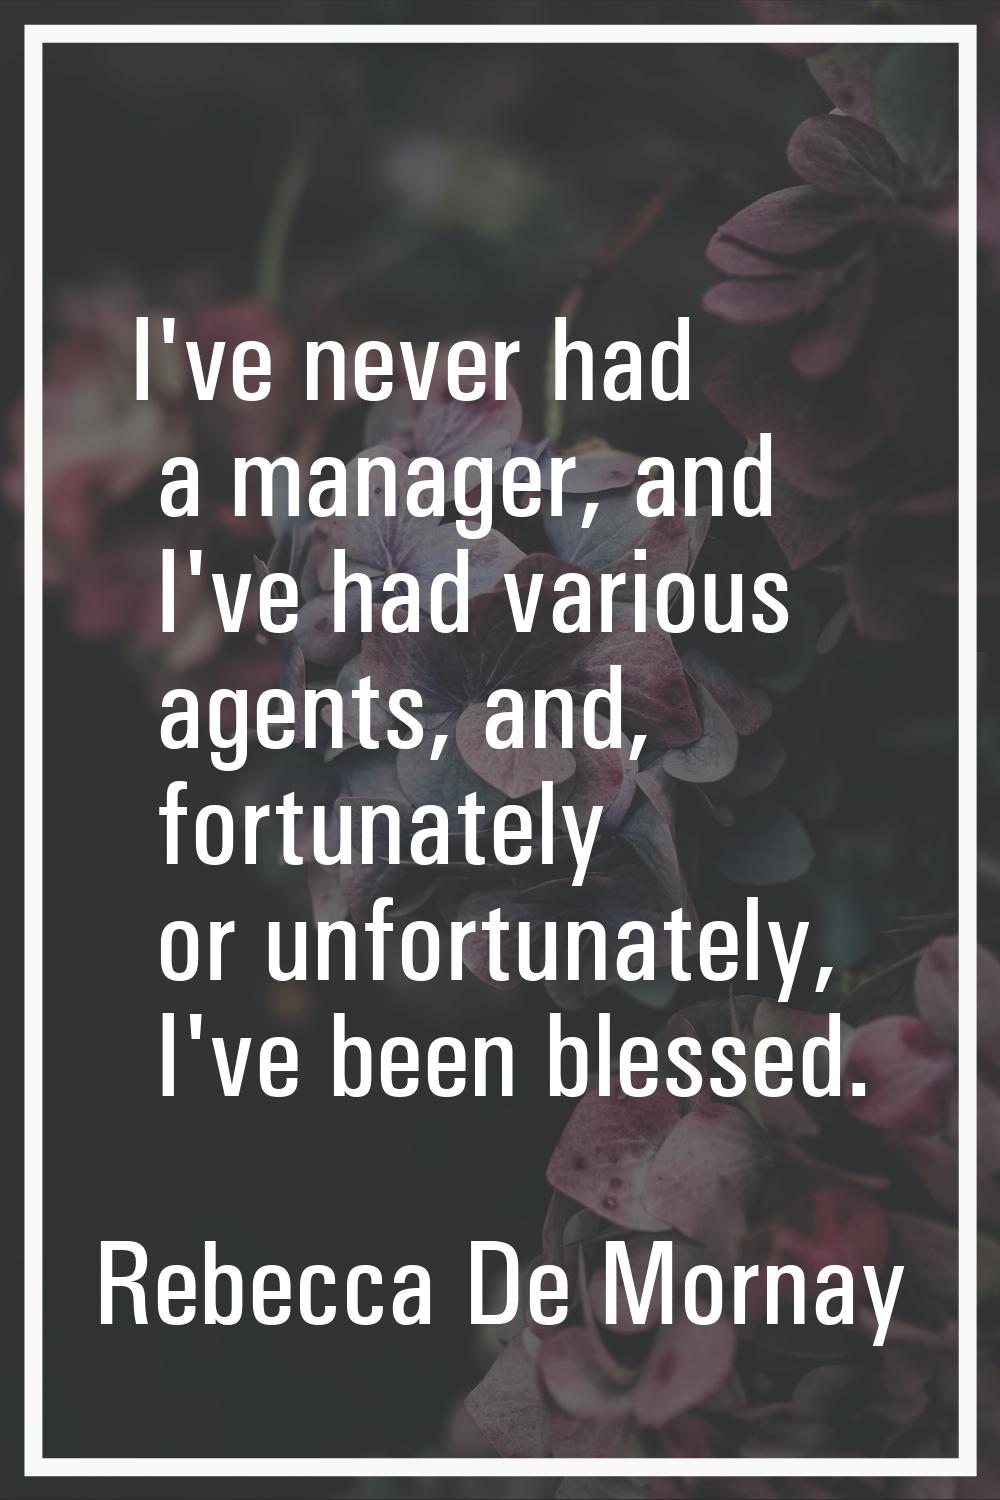 I've never had a manager, and I've had various agents, and, fortunately or unfortunately, I've been